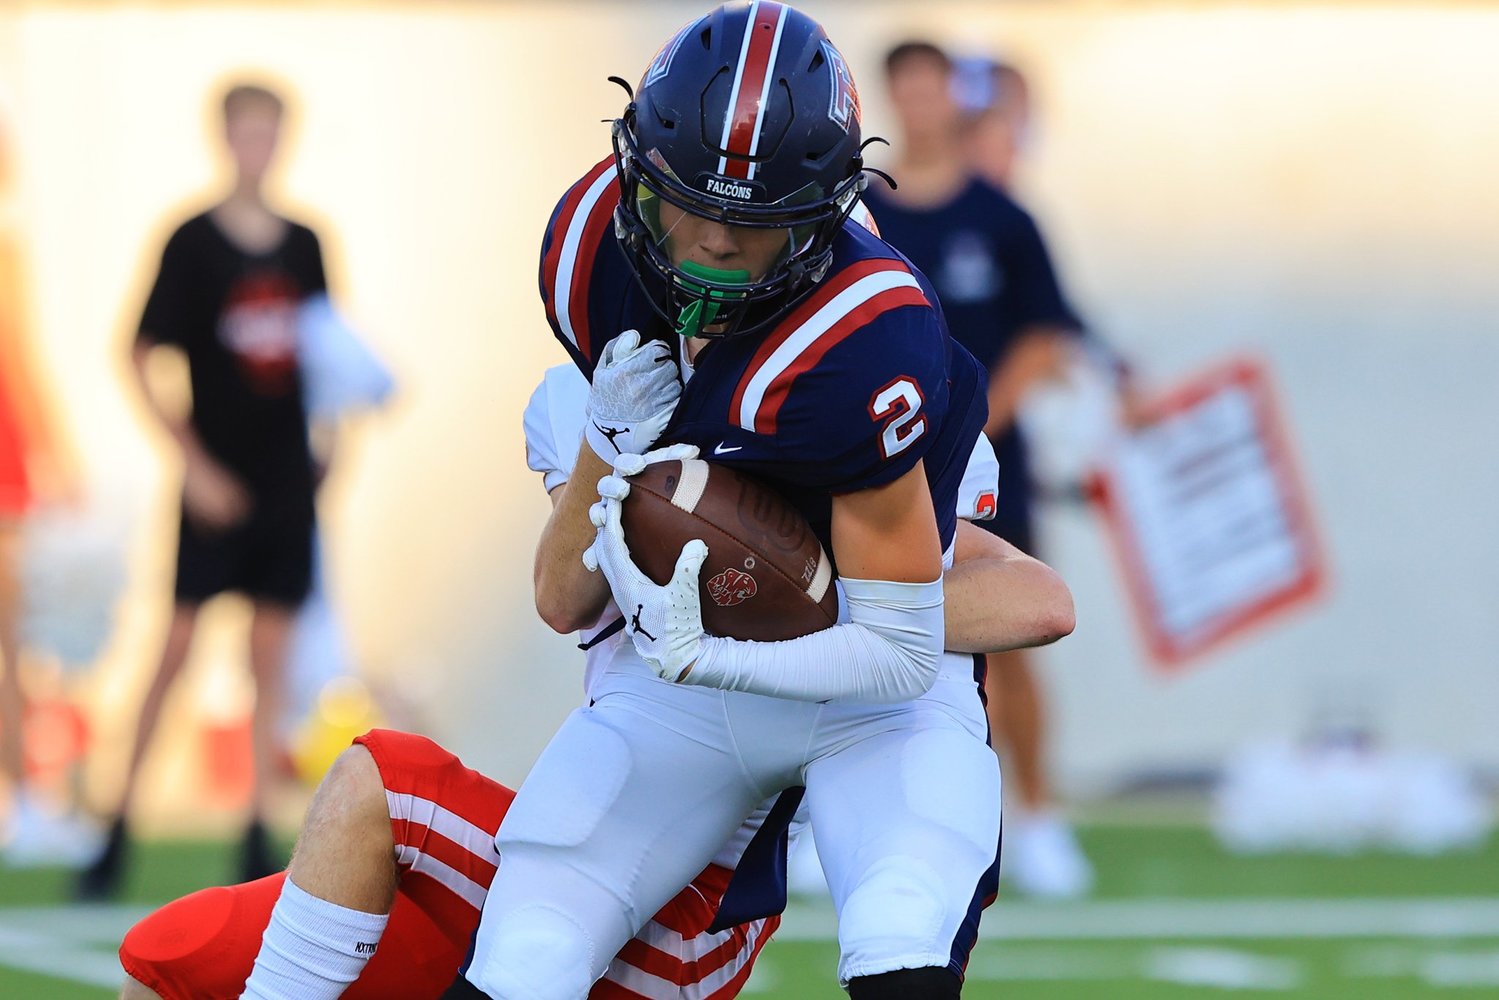 Tompkins Cody Chapman fights for yardage after intercepting a pass during Saturday’s game between Katy and Tompkins at Legacy Stadium.